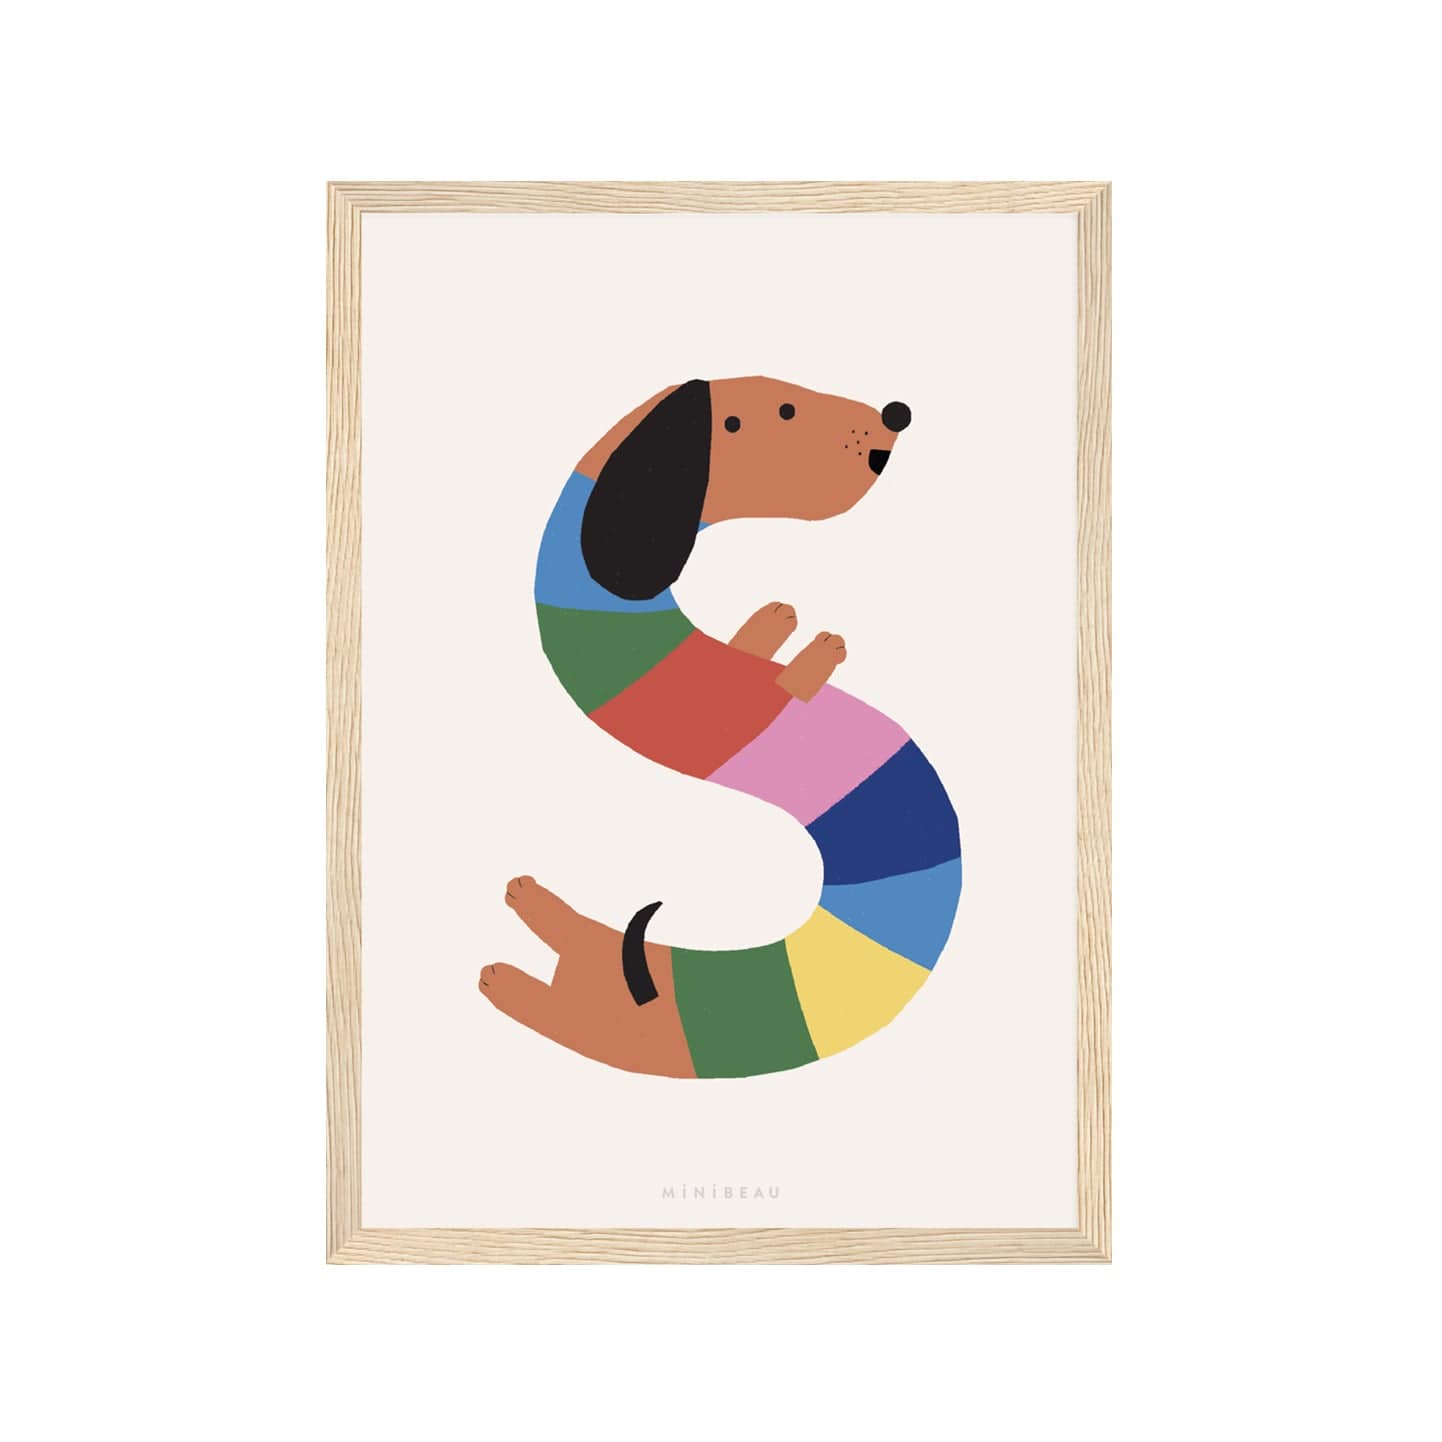 Art print in a light wood frame. Our Happy Alphabet 'S' Art Print shows a rainbow-striped sausage dog forming the shape of an S on a neutral background.